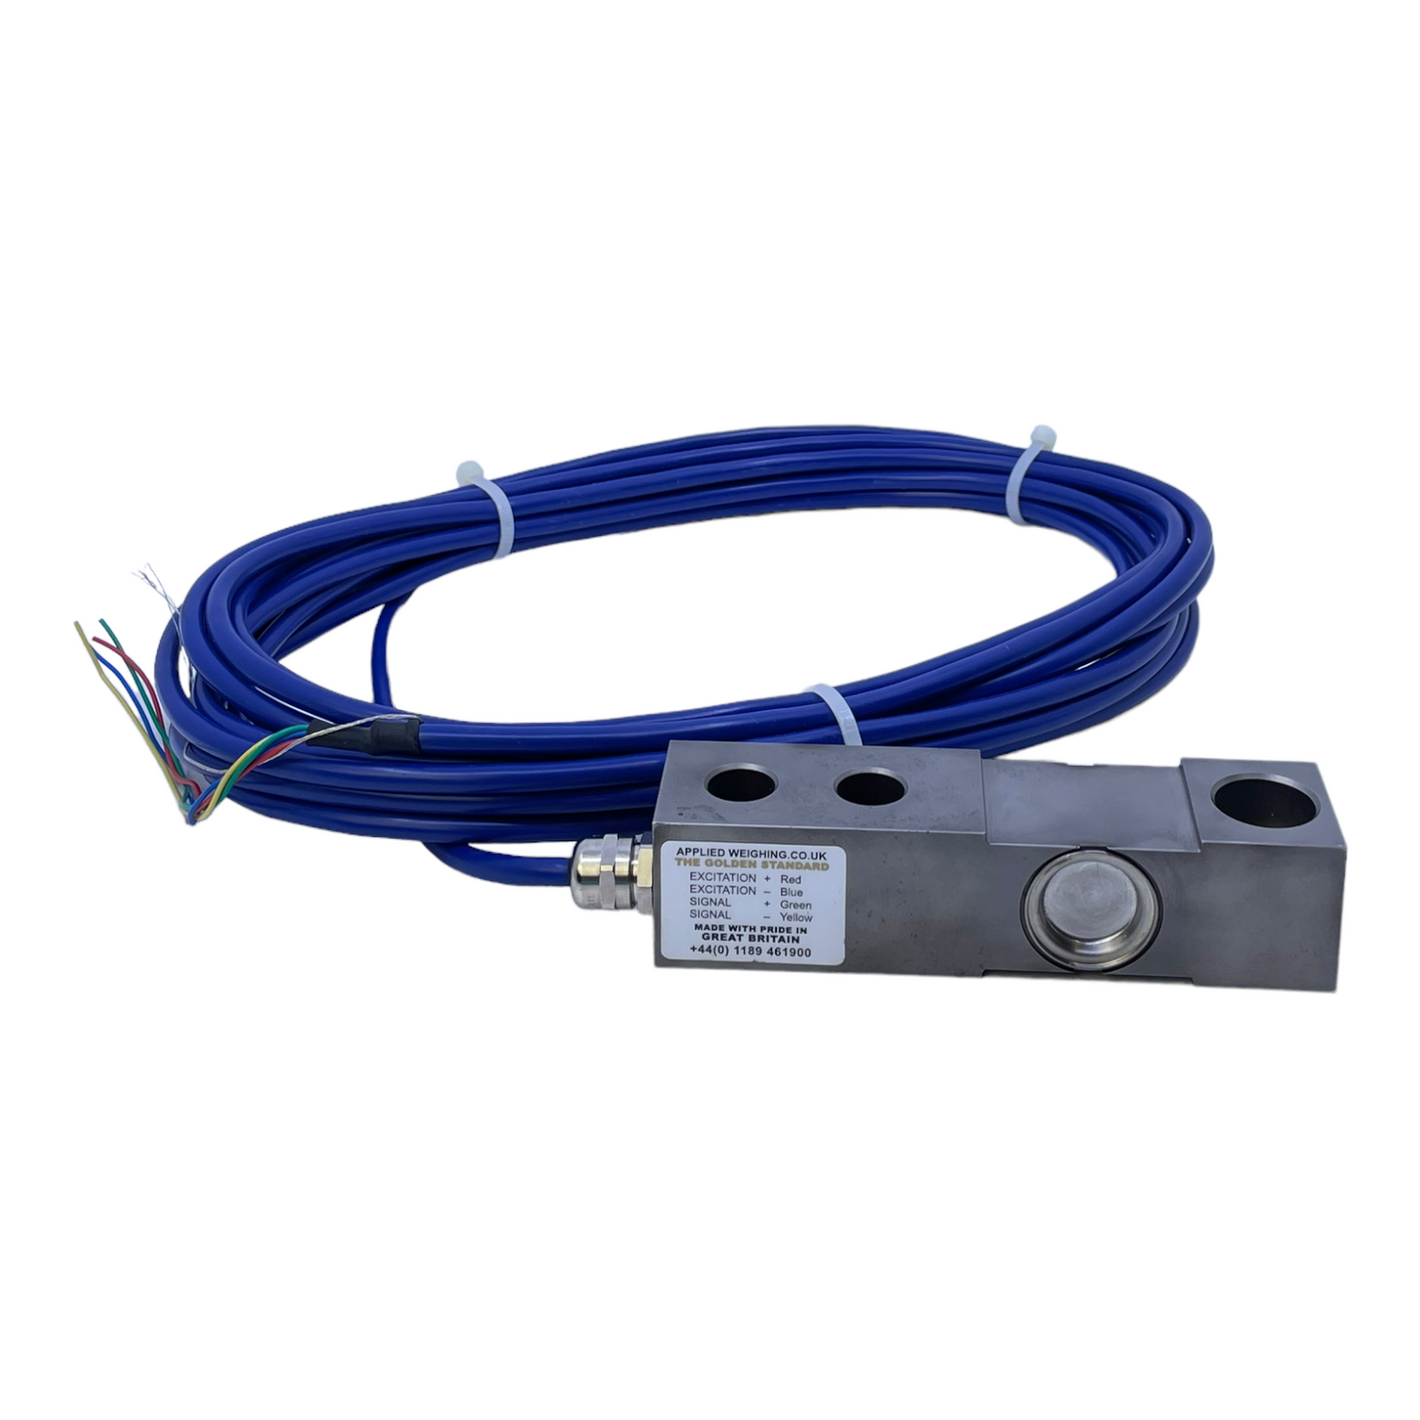 Applied Weighing AW420 load cell 